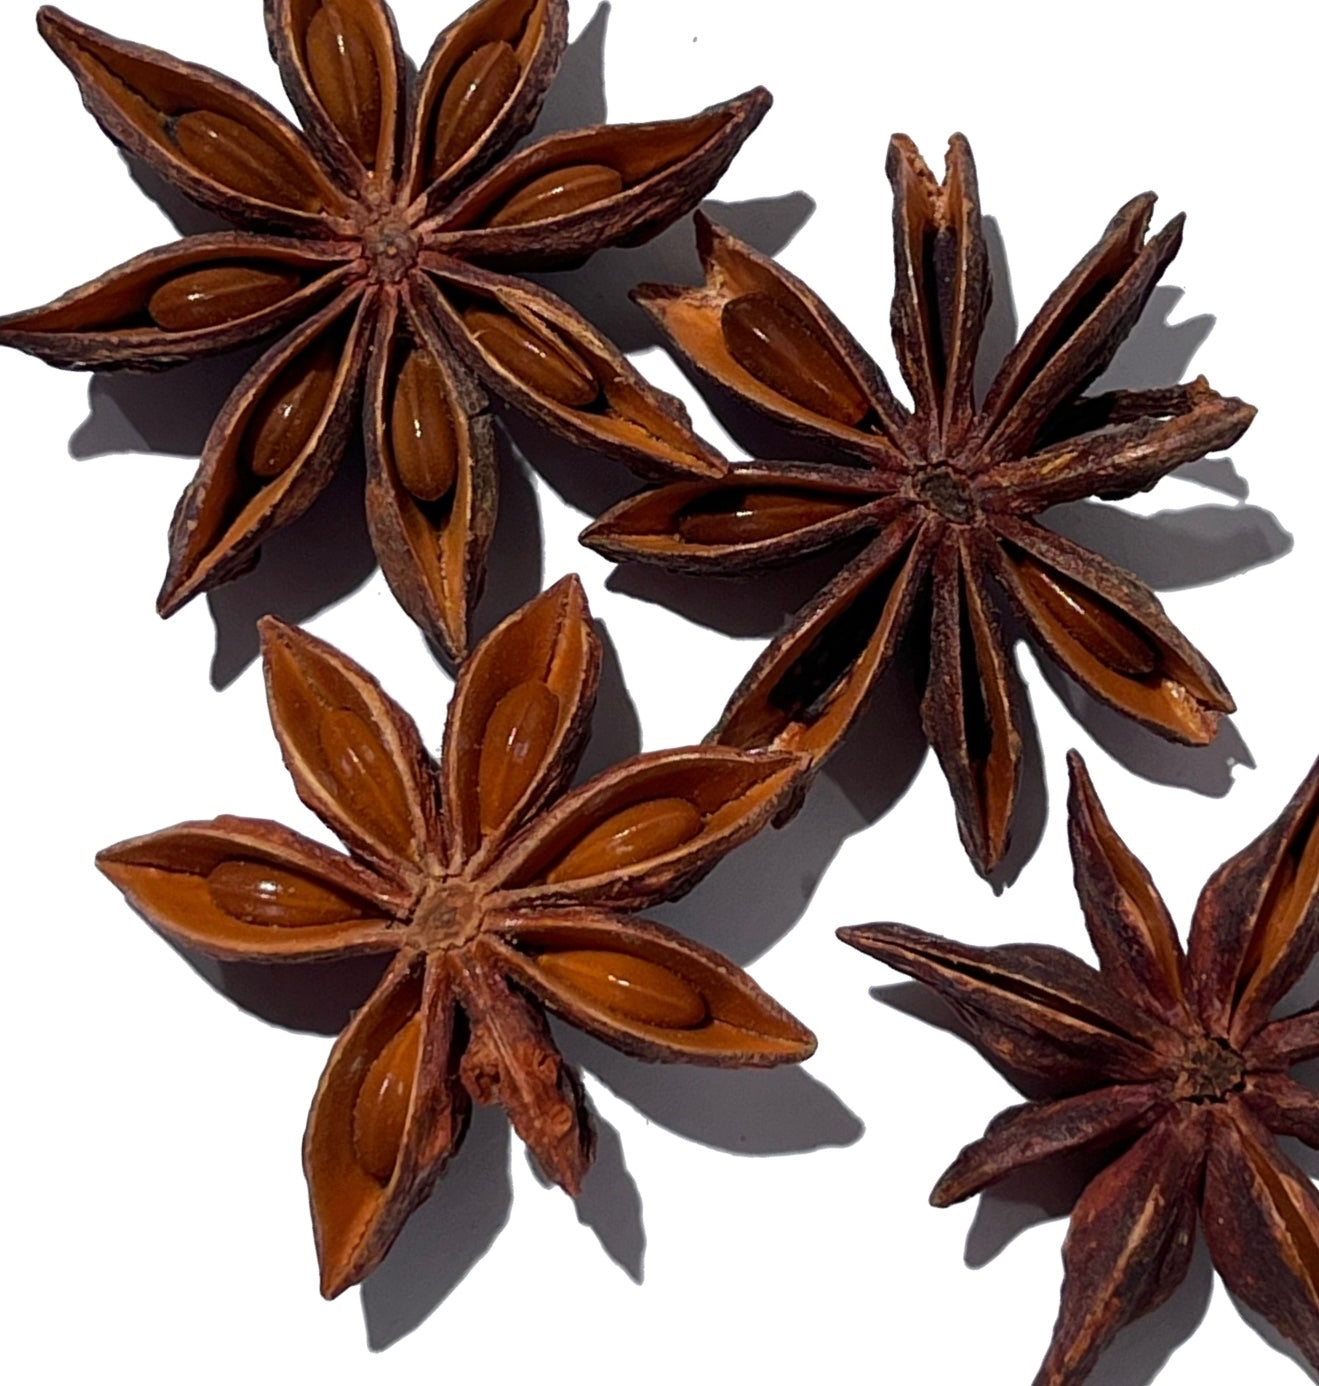 Star Anise (Whole)